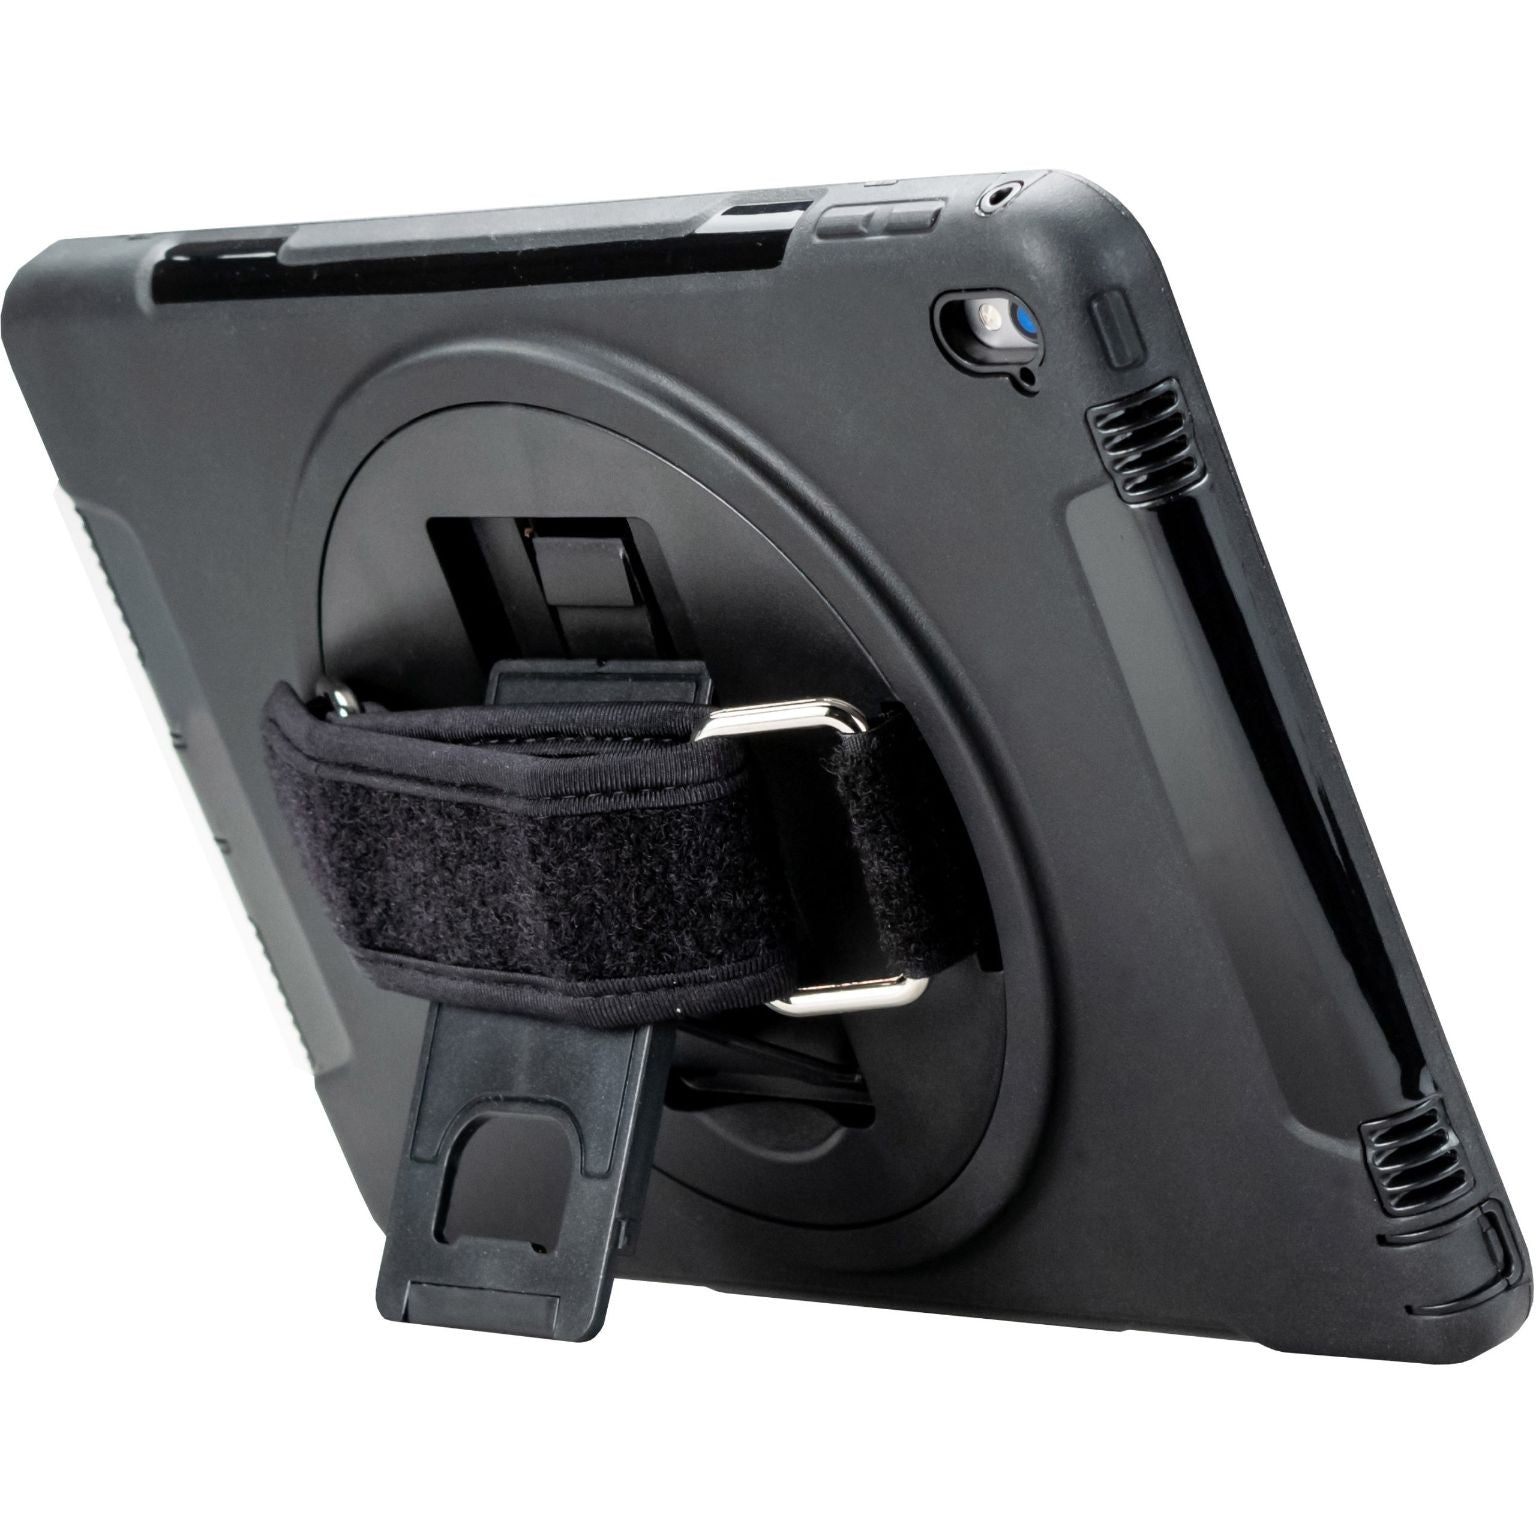 Military Grade Protective Case with Built-in 360 Degree Rotatable Grip Kickstand for iPad Pro 9.7"